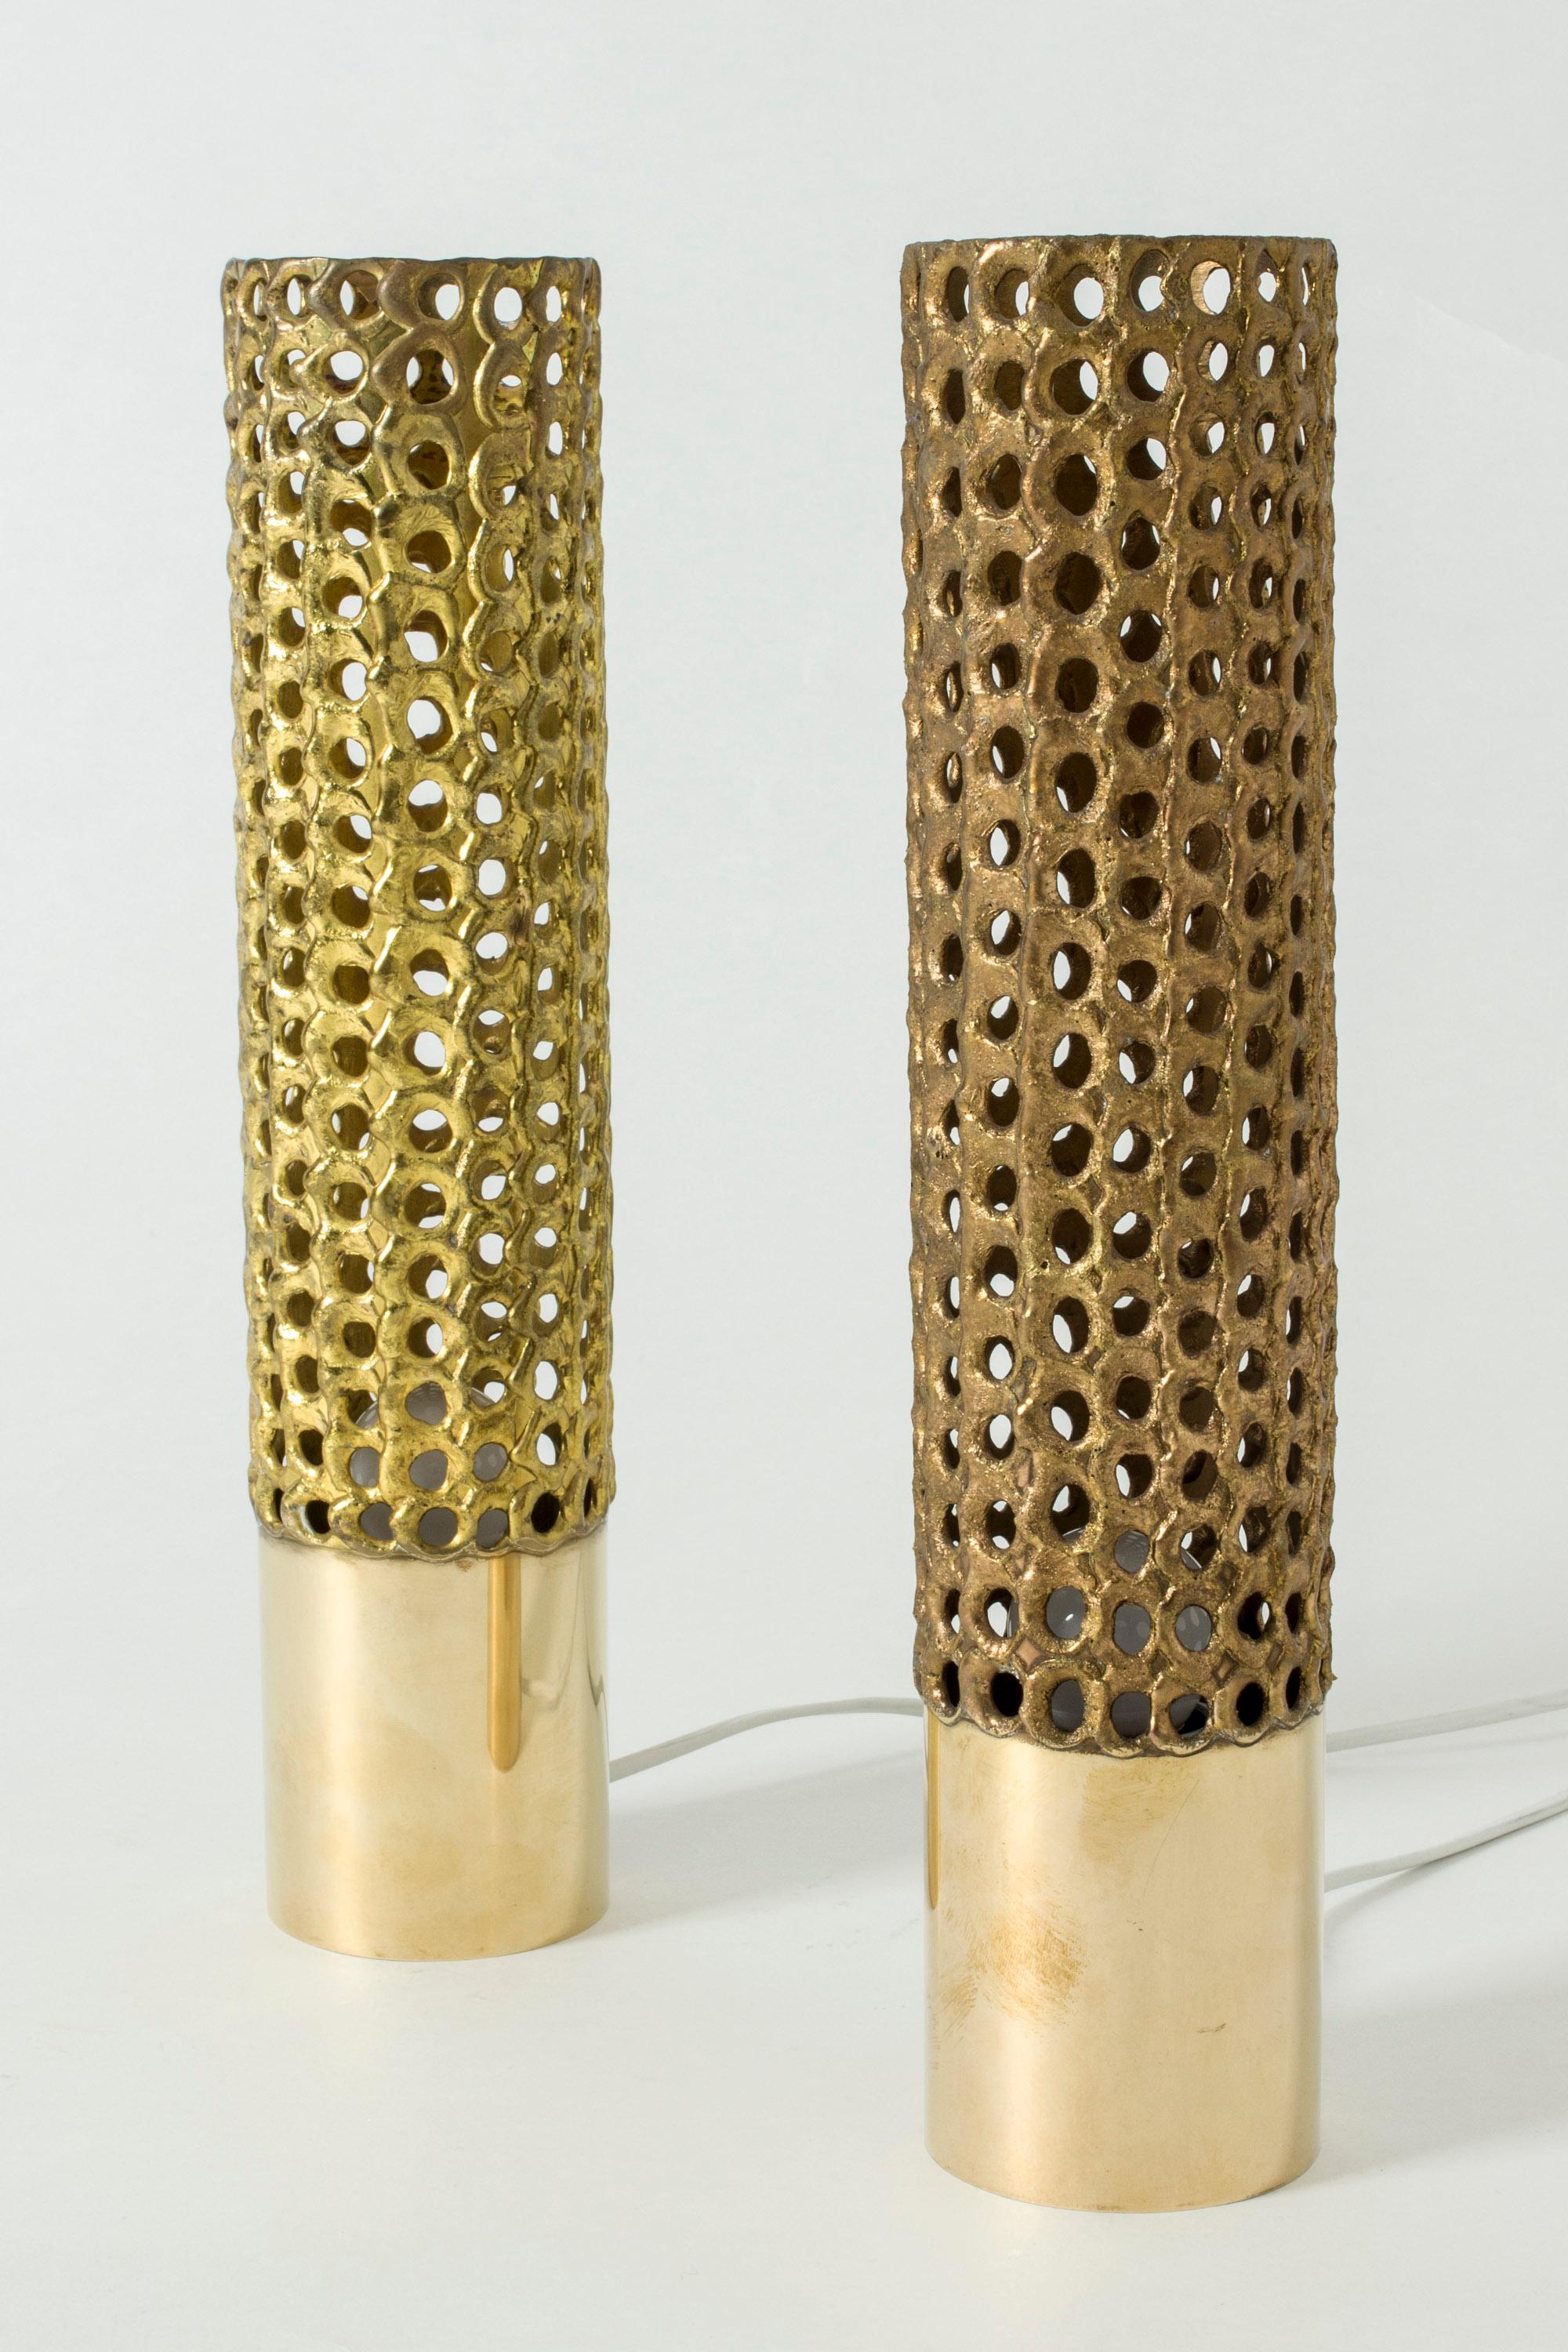 Amazing pair of brass table lamps in a Brutalist design by Pierre Forssell. With this design Pierre Forssell presented a whole new way of using brass in lighting and decorative objects. Executed by the craftsman Frans Goldberg in Pierre Forssell’s